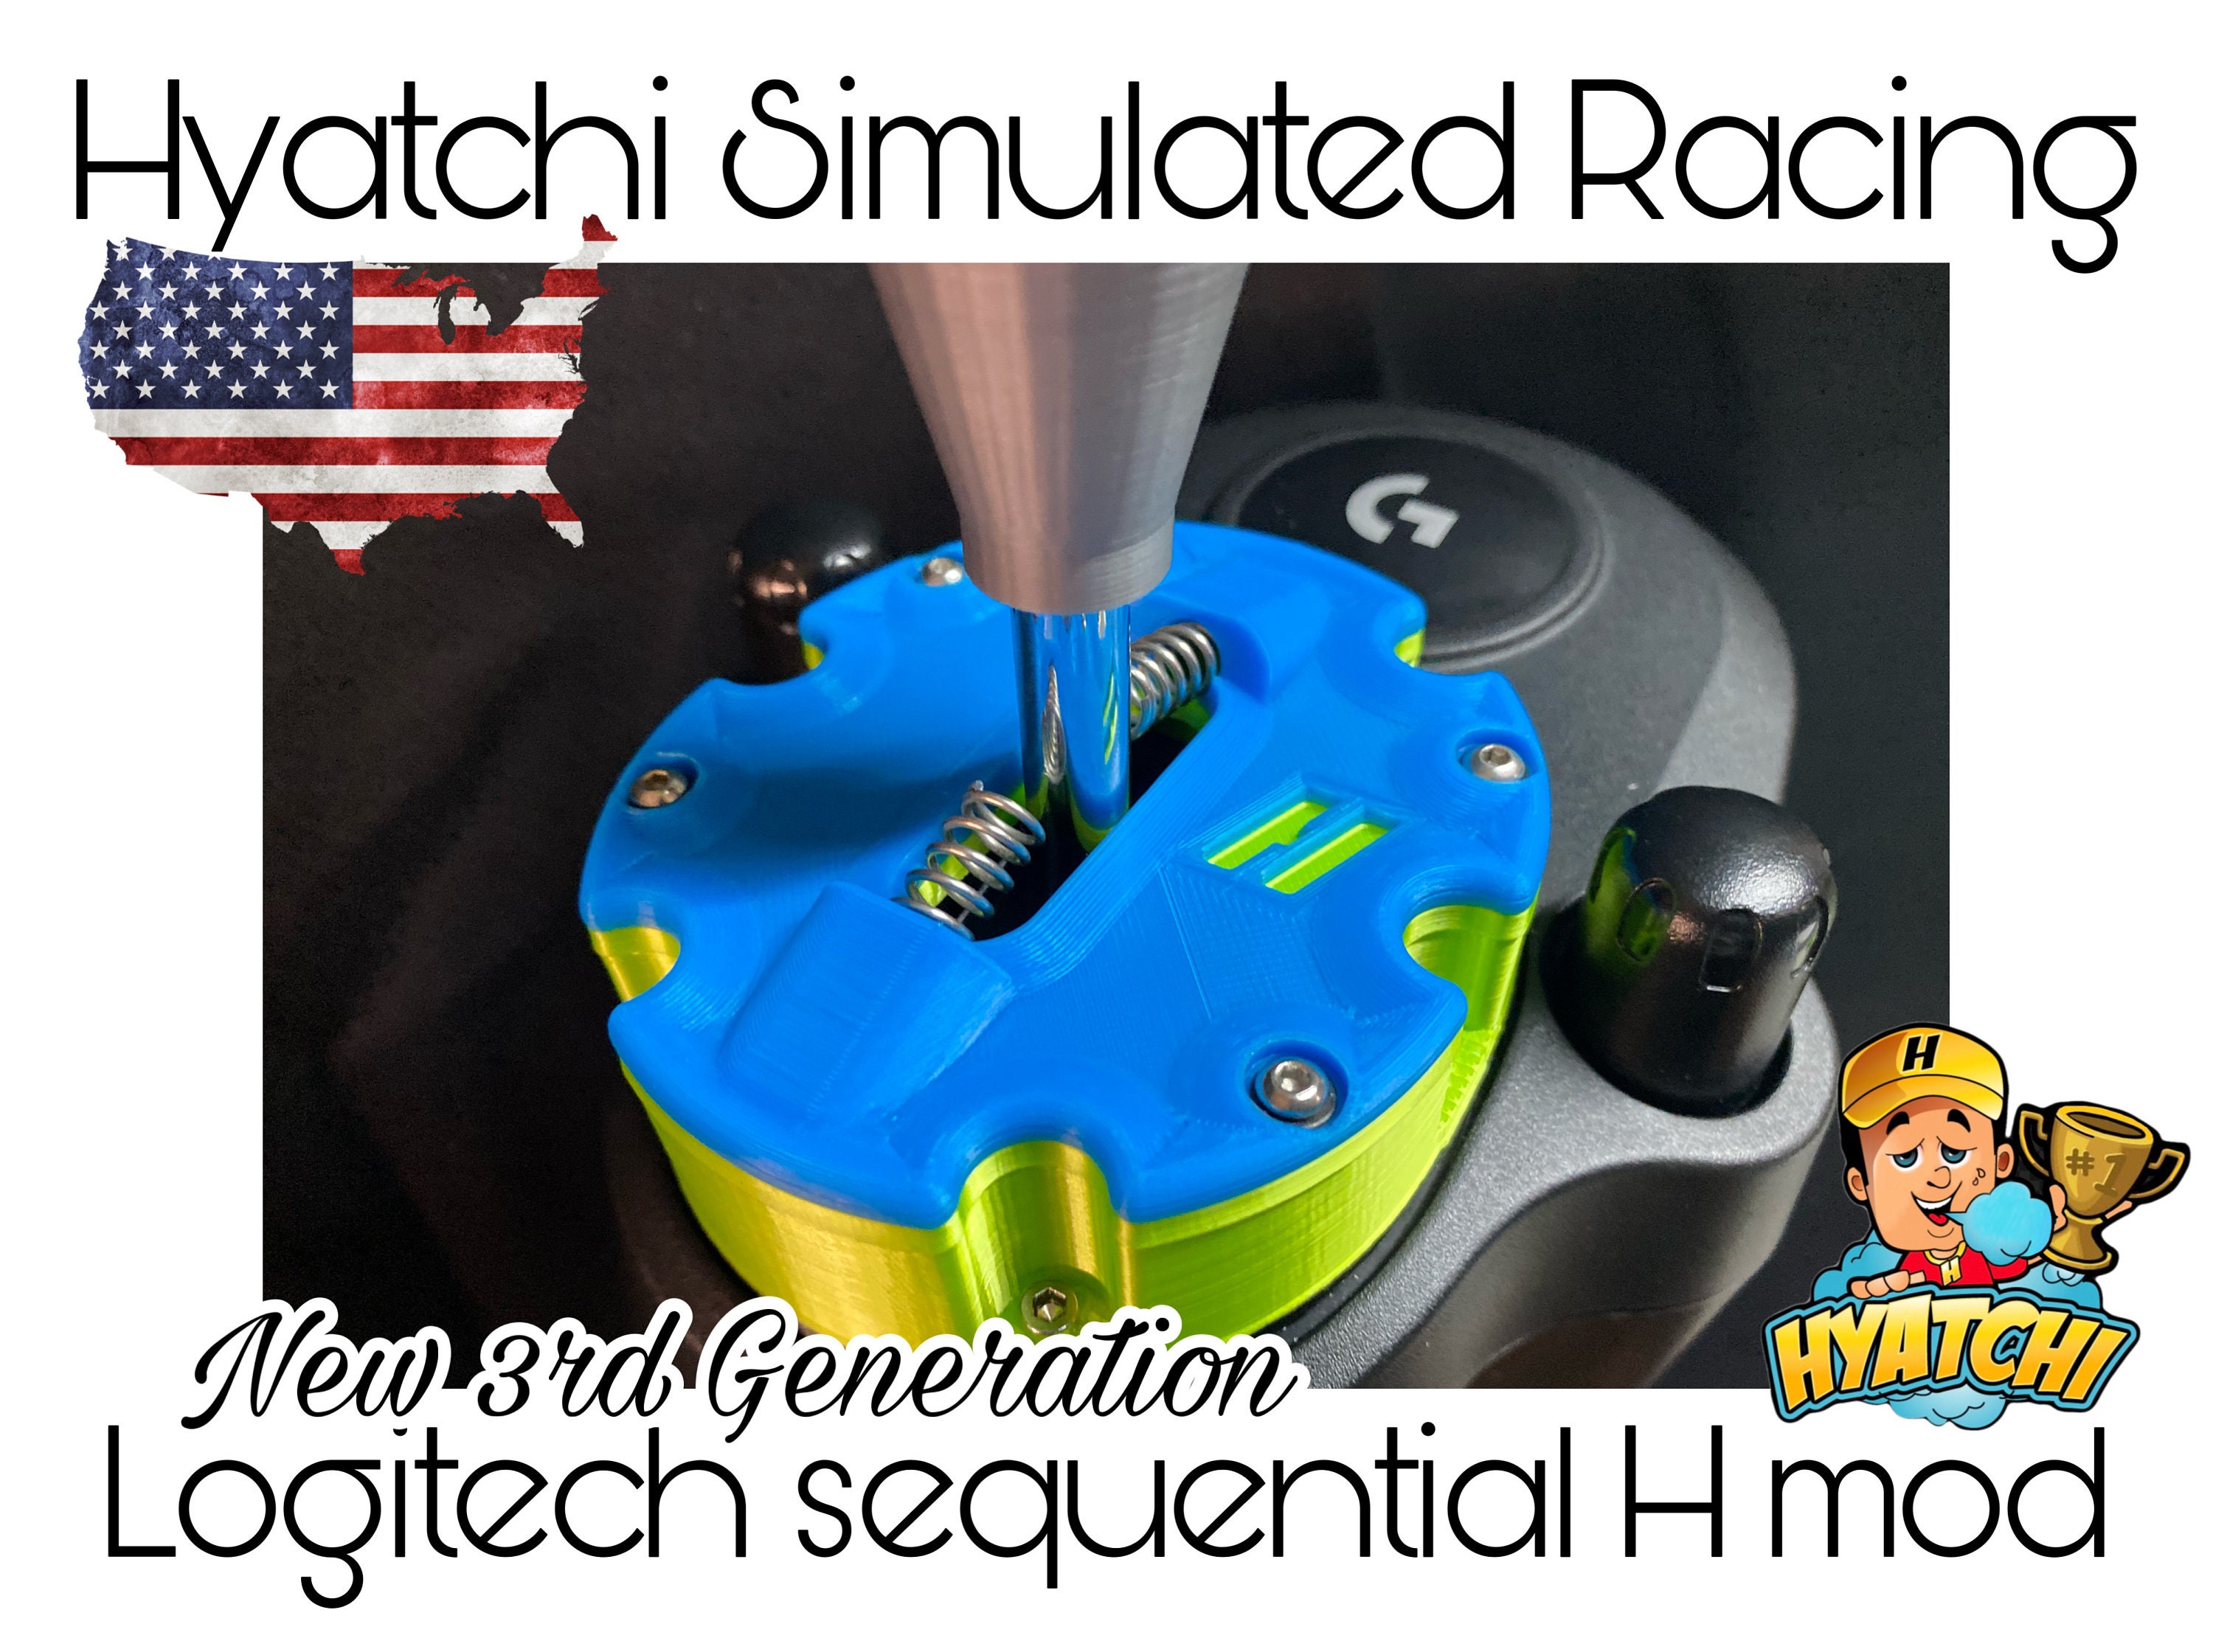 Logitech G29 G920 G27 G25 Mod Sequential Shifter Sequential Shift  Modification